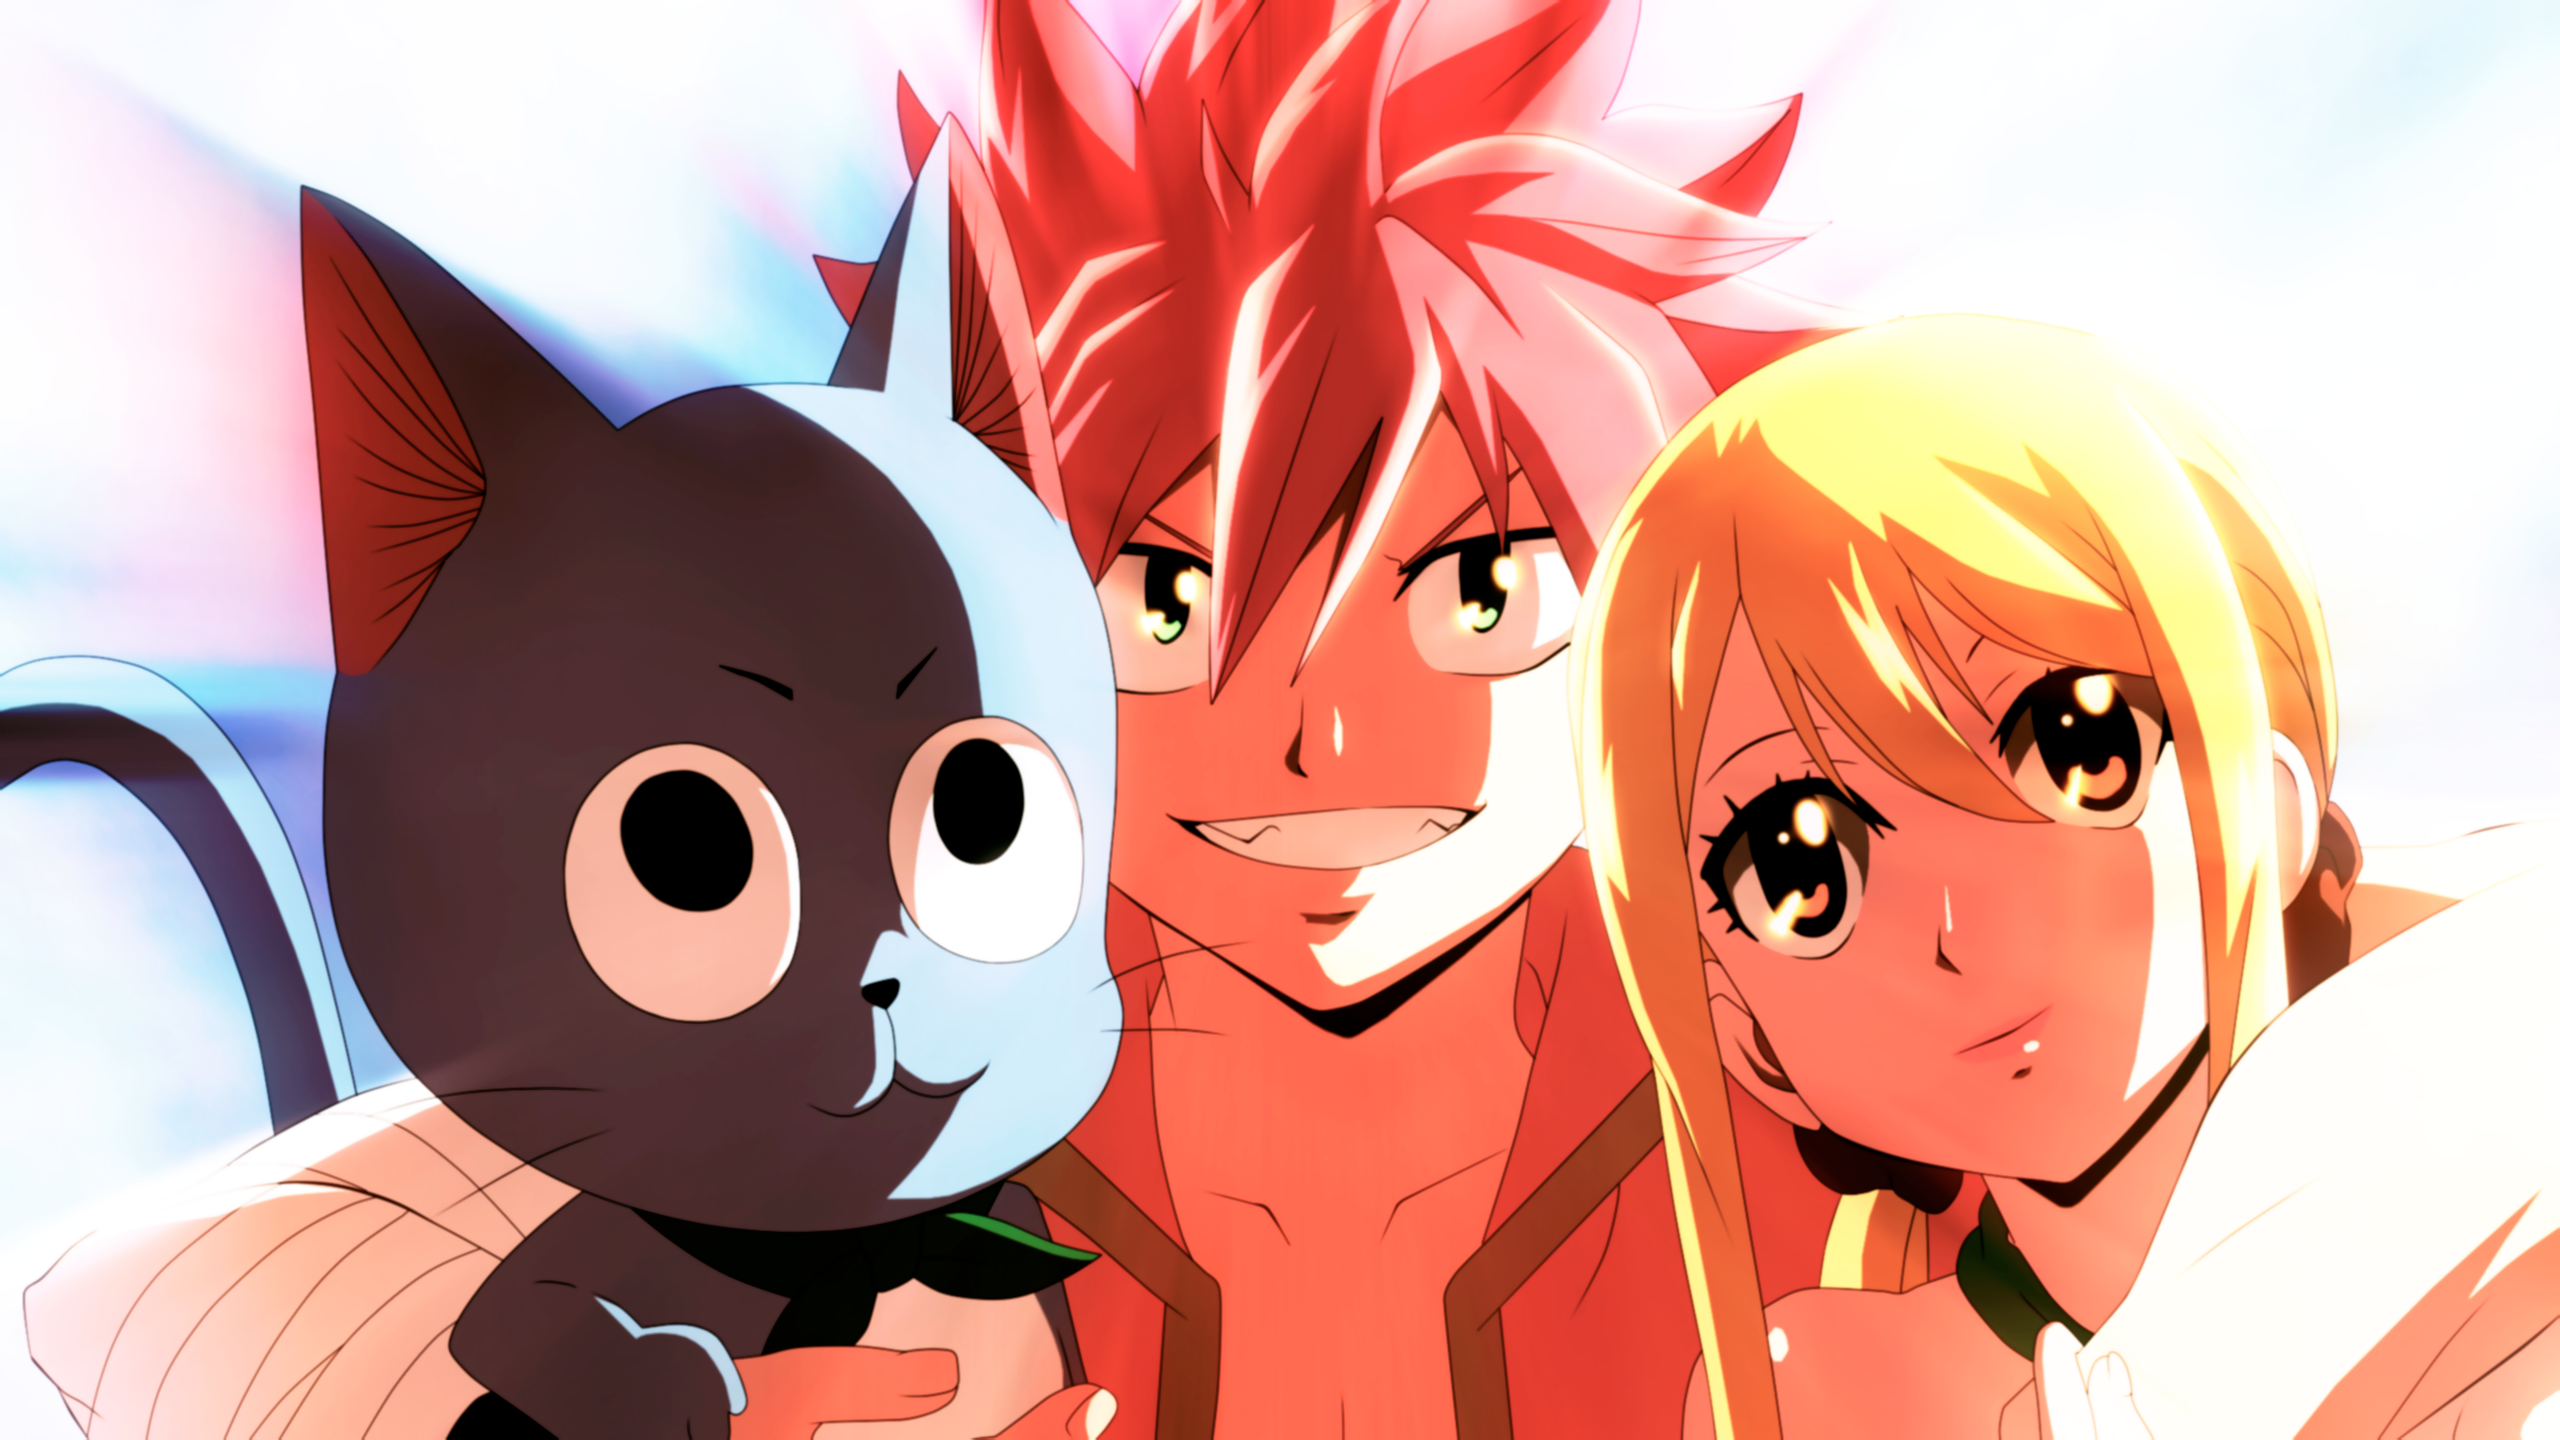 Anime fairy tail hd paper by gevdano